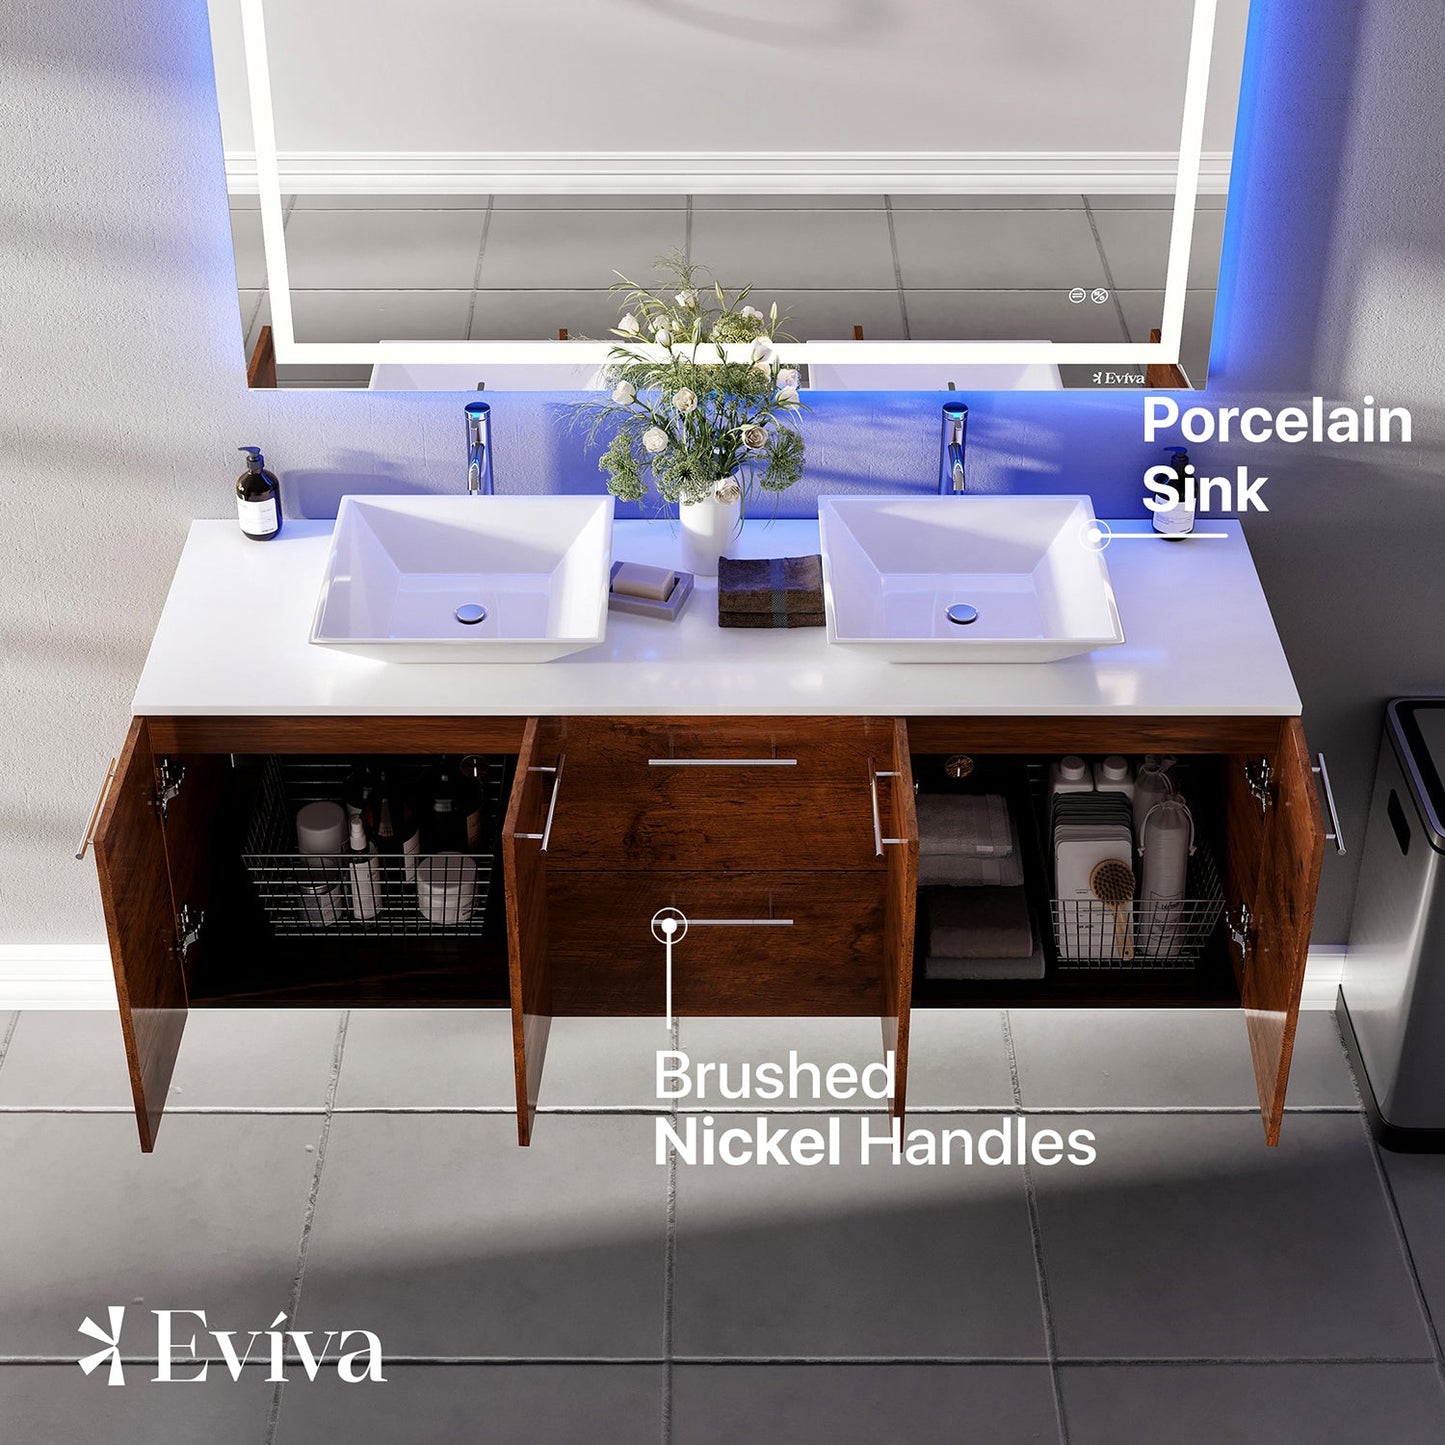 Lux 60"W x 22"D Rosewood Double Sink Bathroom Vanity with White Quartz Countertop and Vessel Porcelain Sink